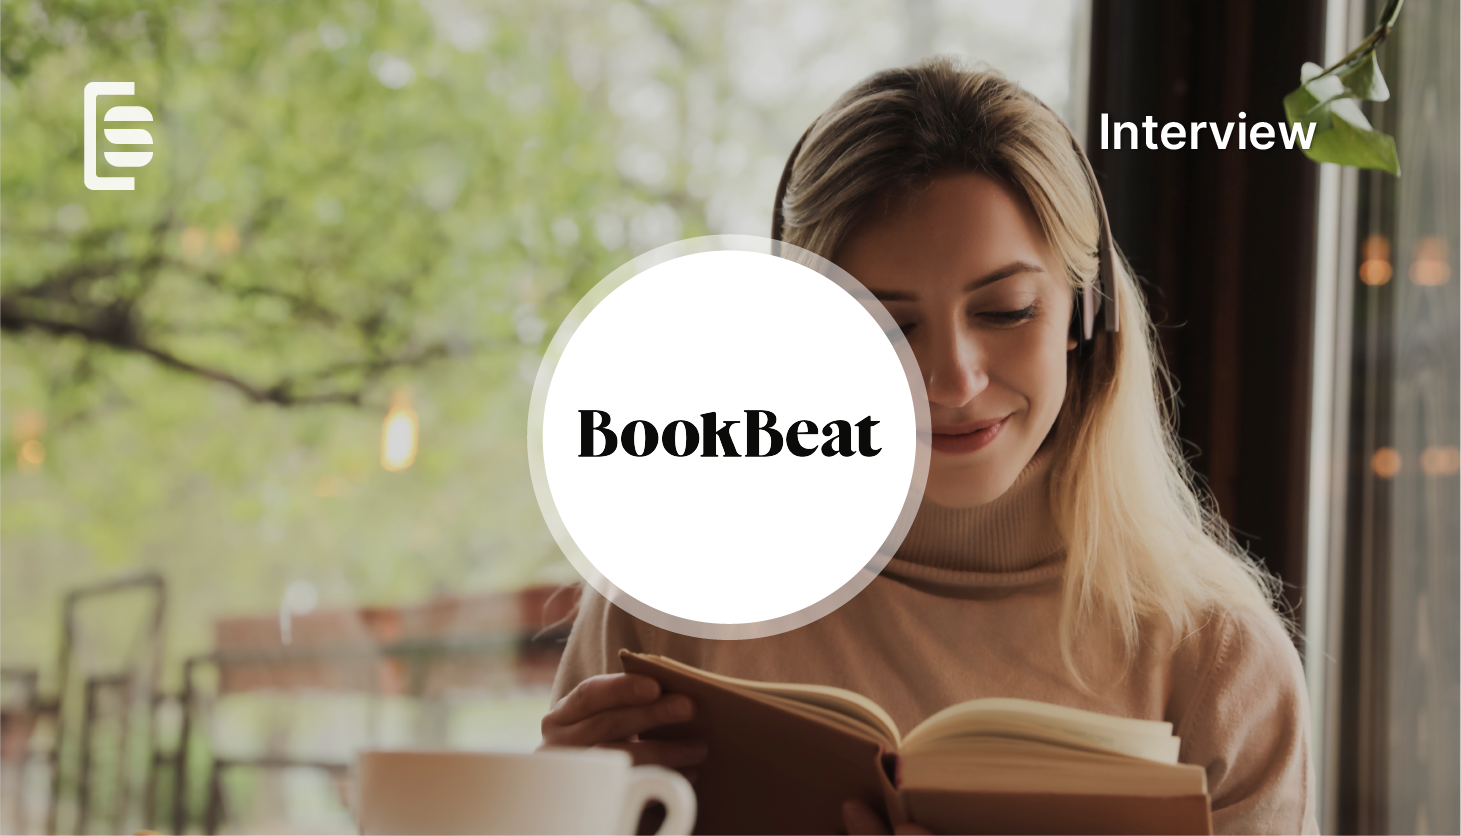 The Interviews - BookBeat's Dream for Italy: put an end to the fragmentation of the audiobook market